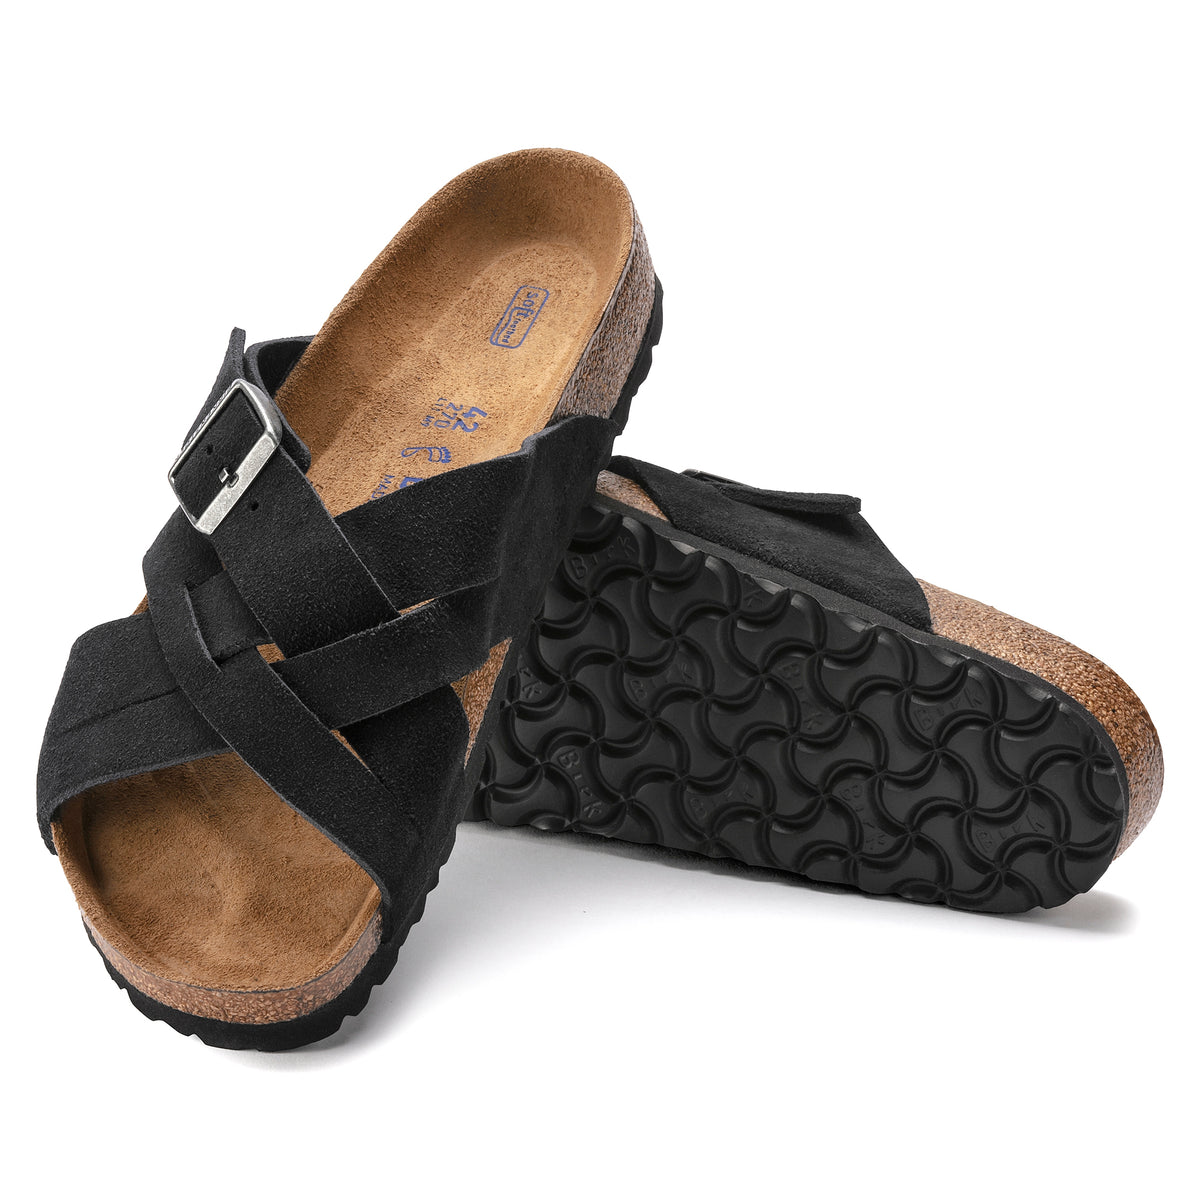 Birkenstock Limited Edition Lugano Soft Footbed coin suede